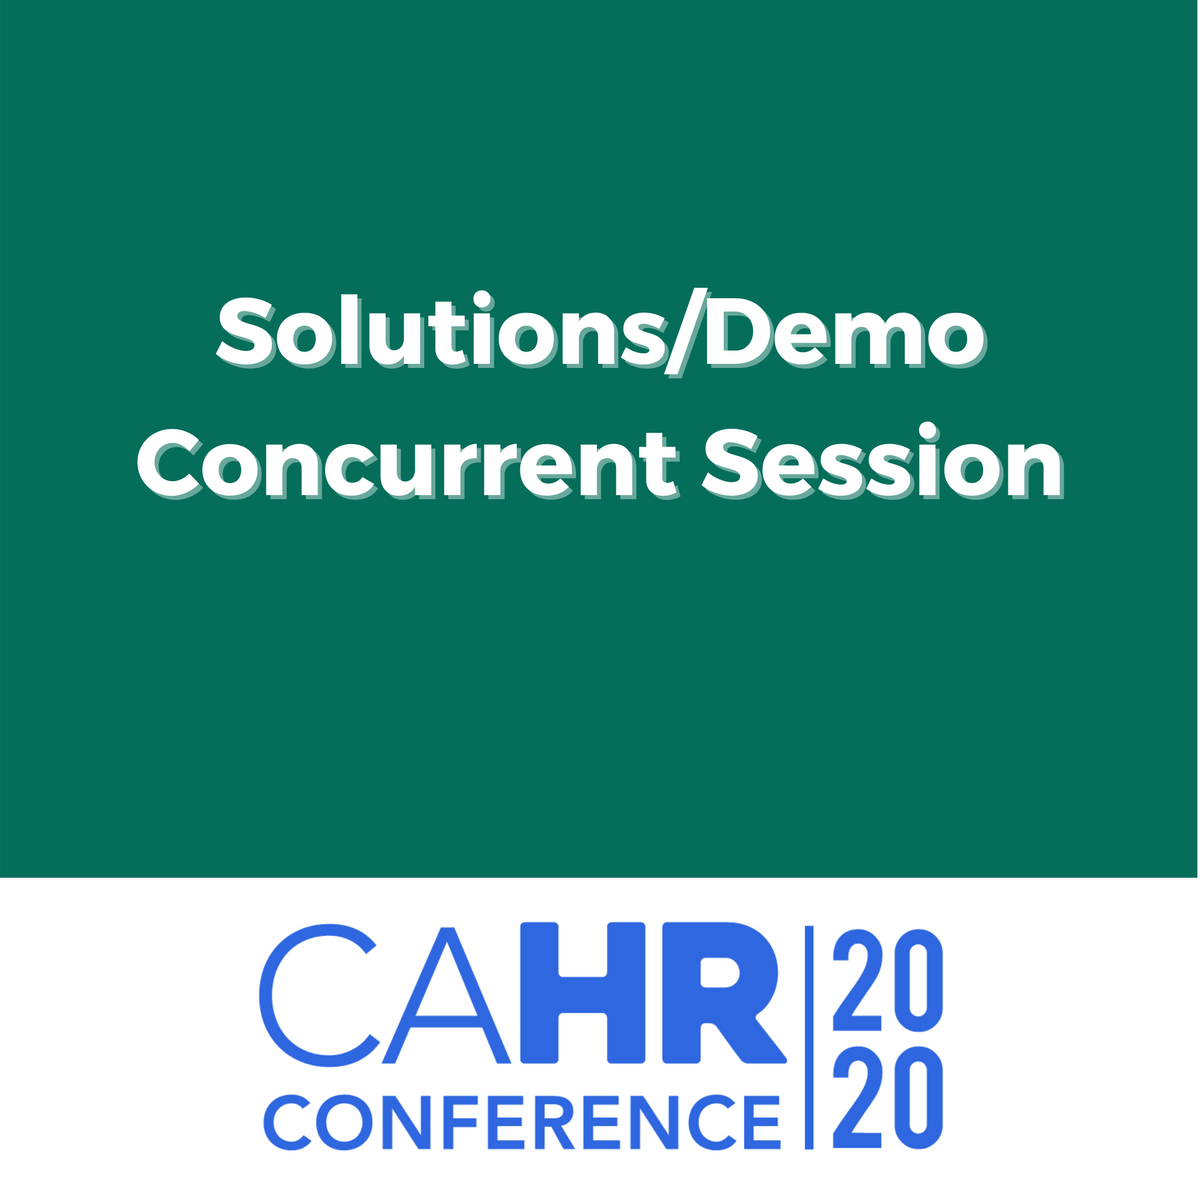 Solutions/Demo Concurrent Session